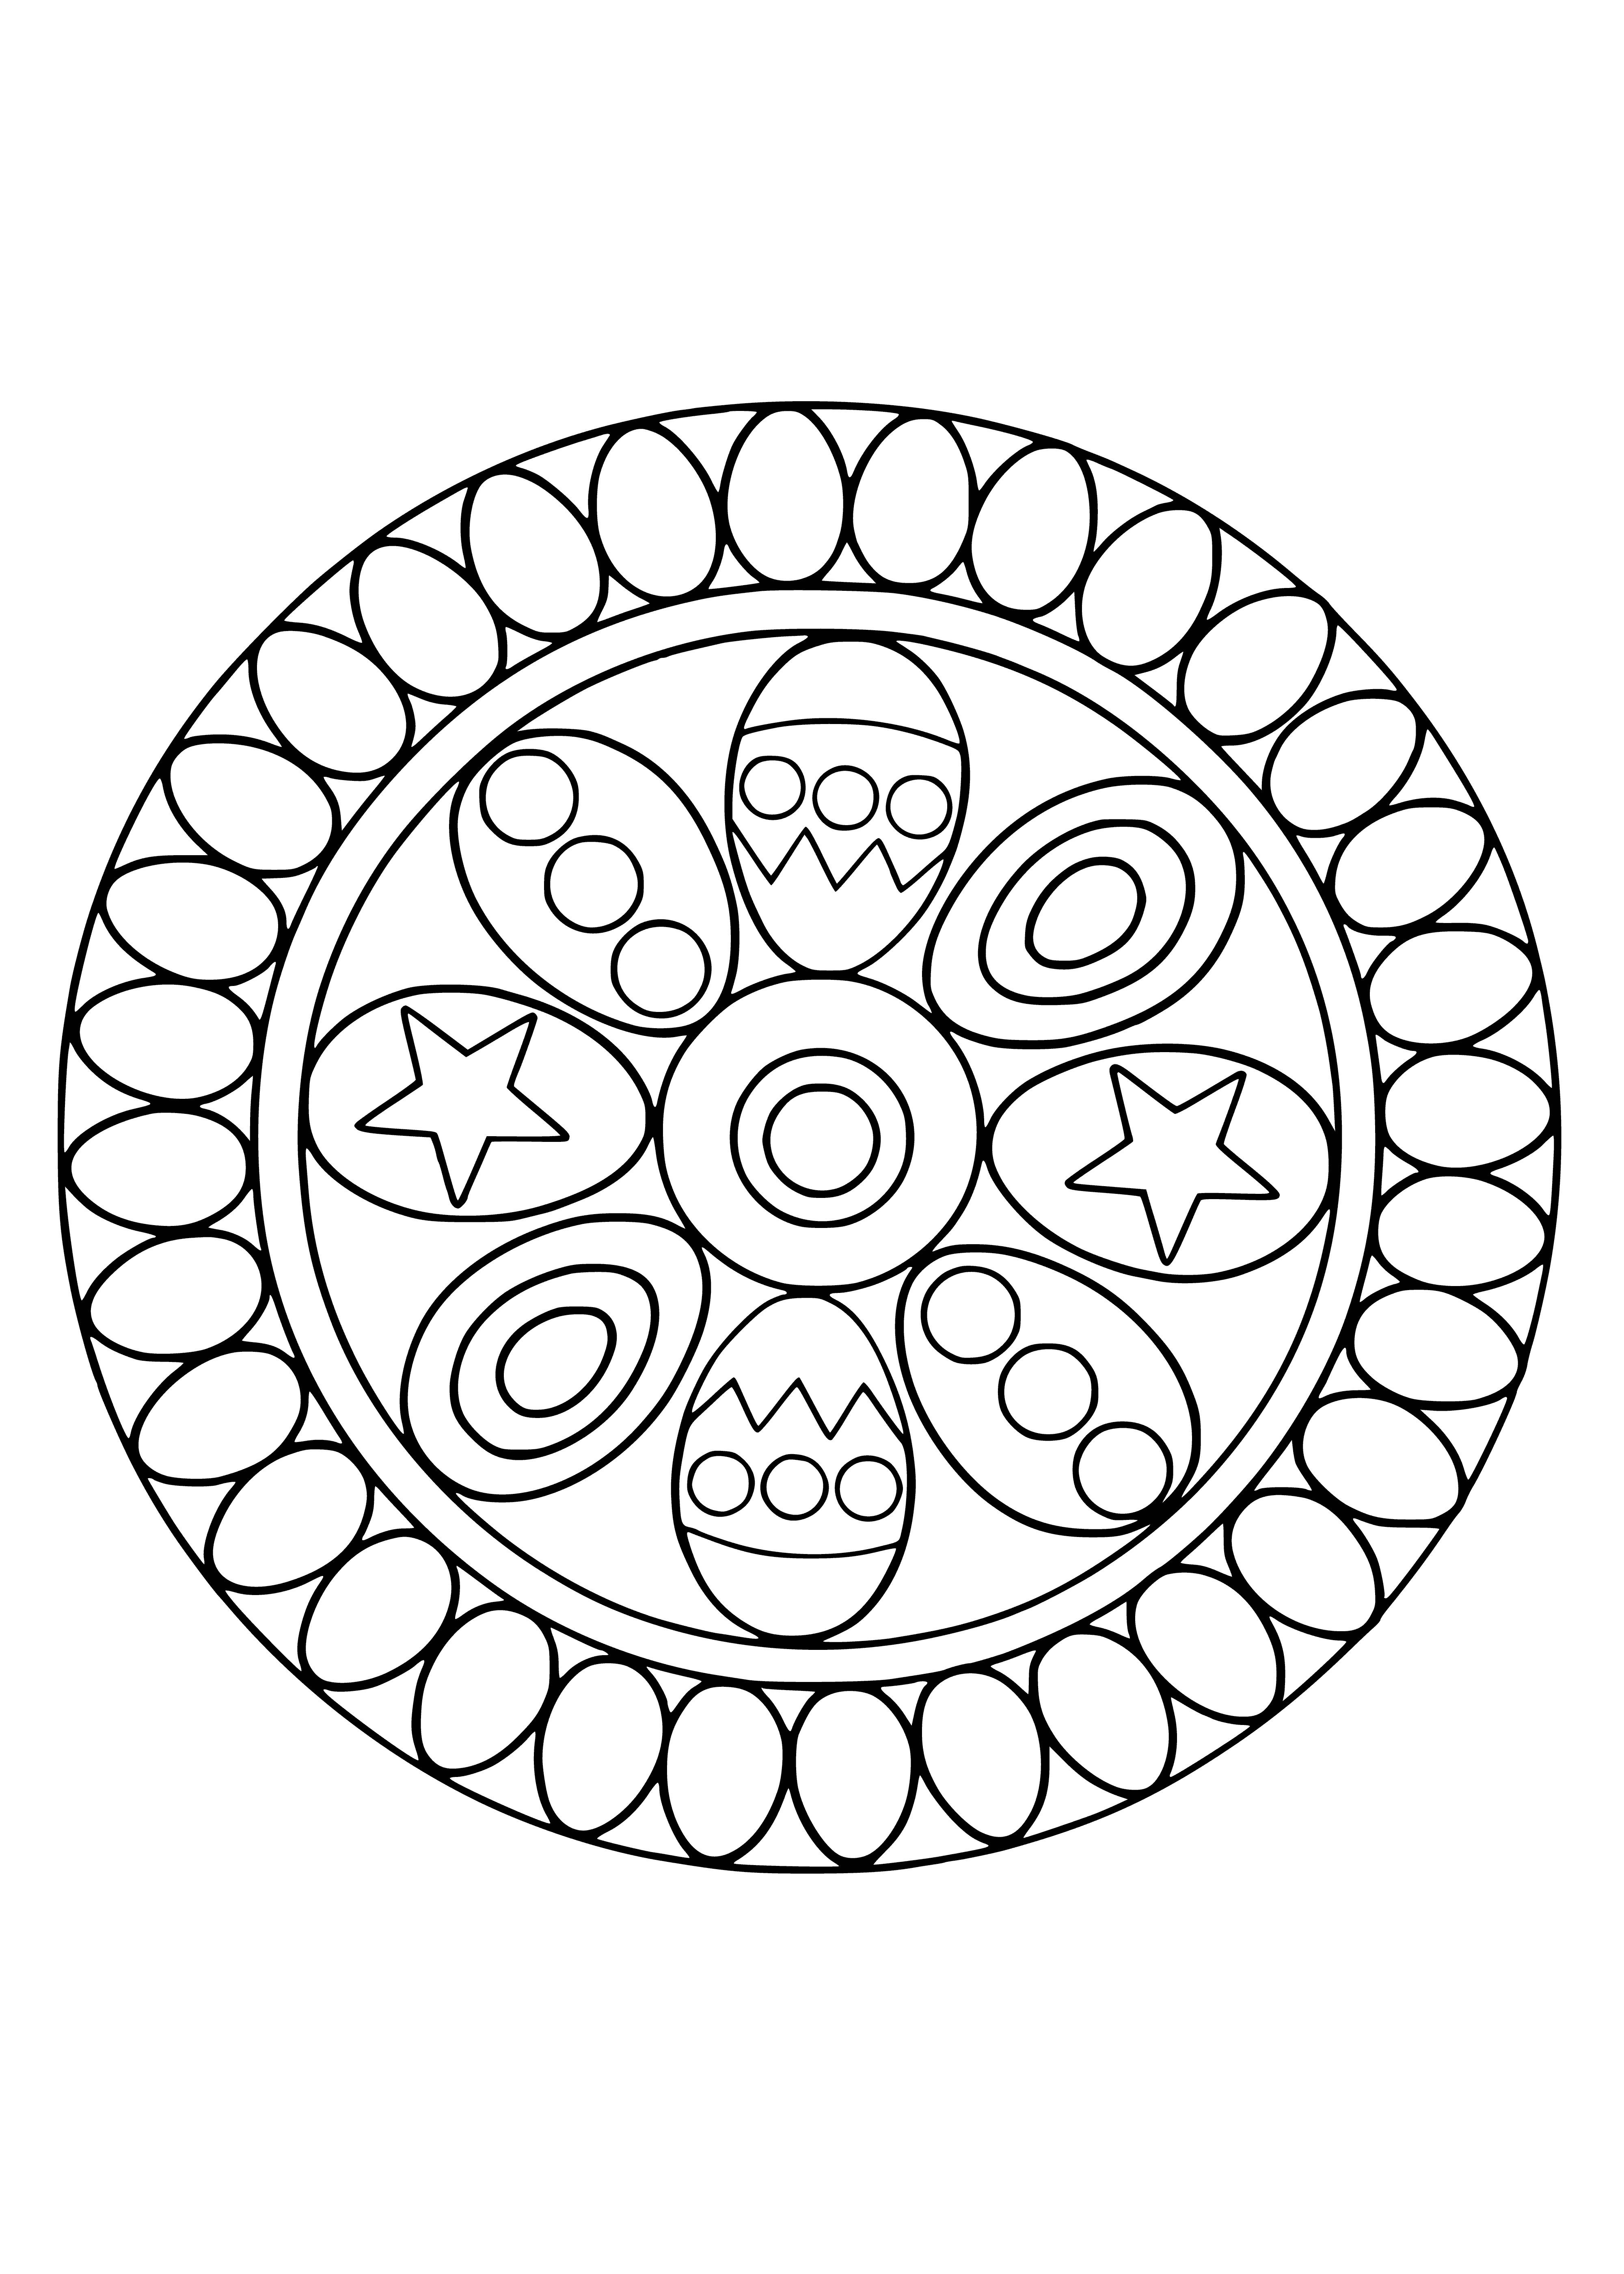 coloring page: This Easter mandala coloring page uses bright colors, symmetrical design and hidden Easter eggs to create a fun and relaxing activity. #coloring #mandalas #easter